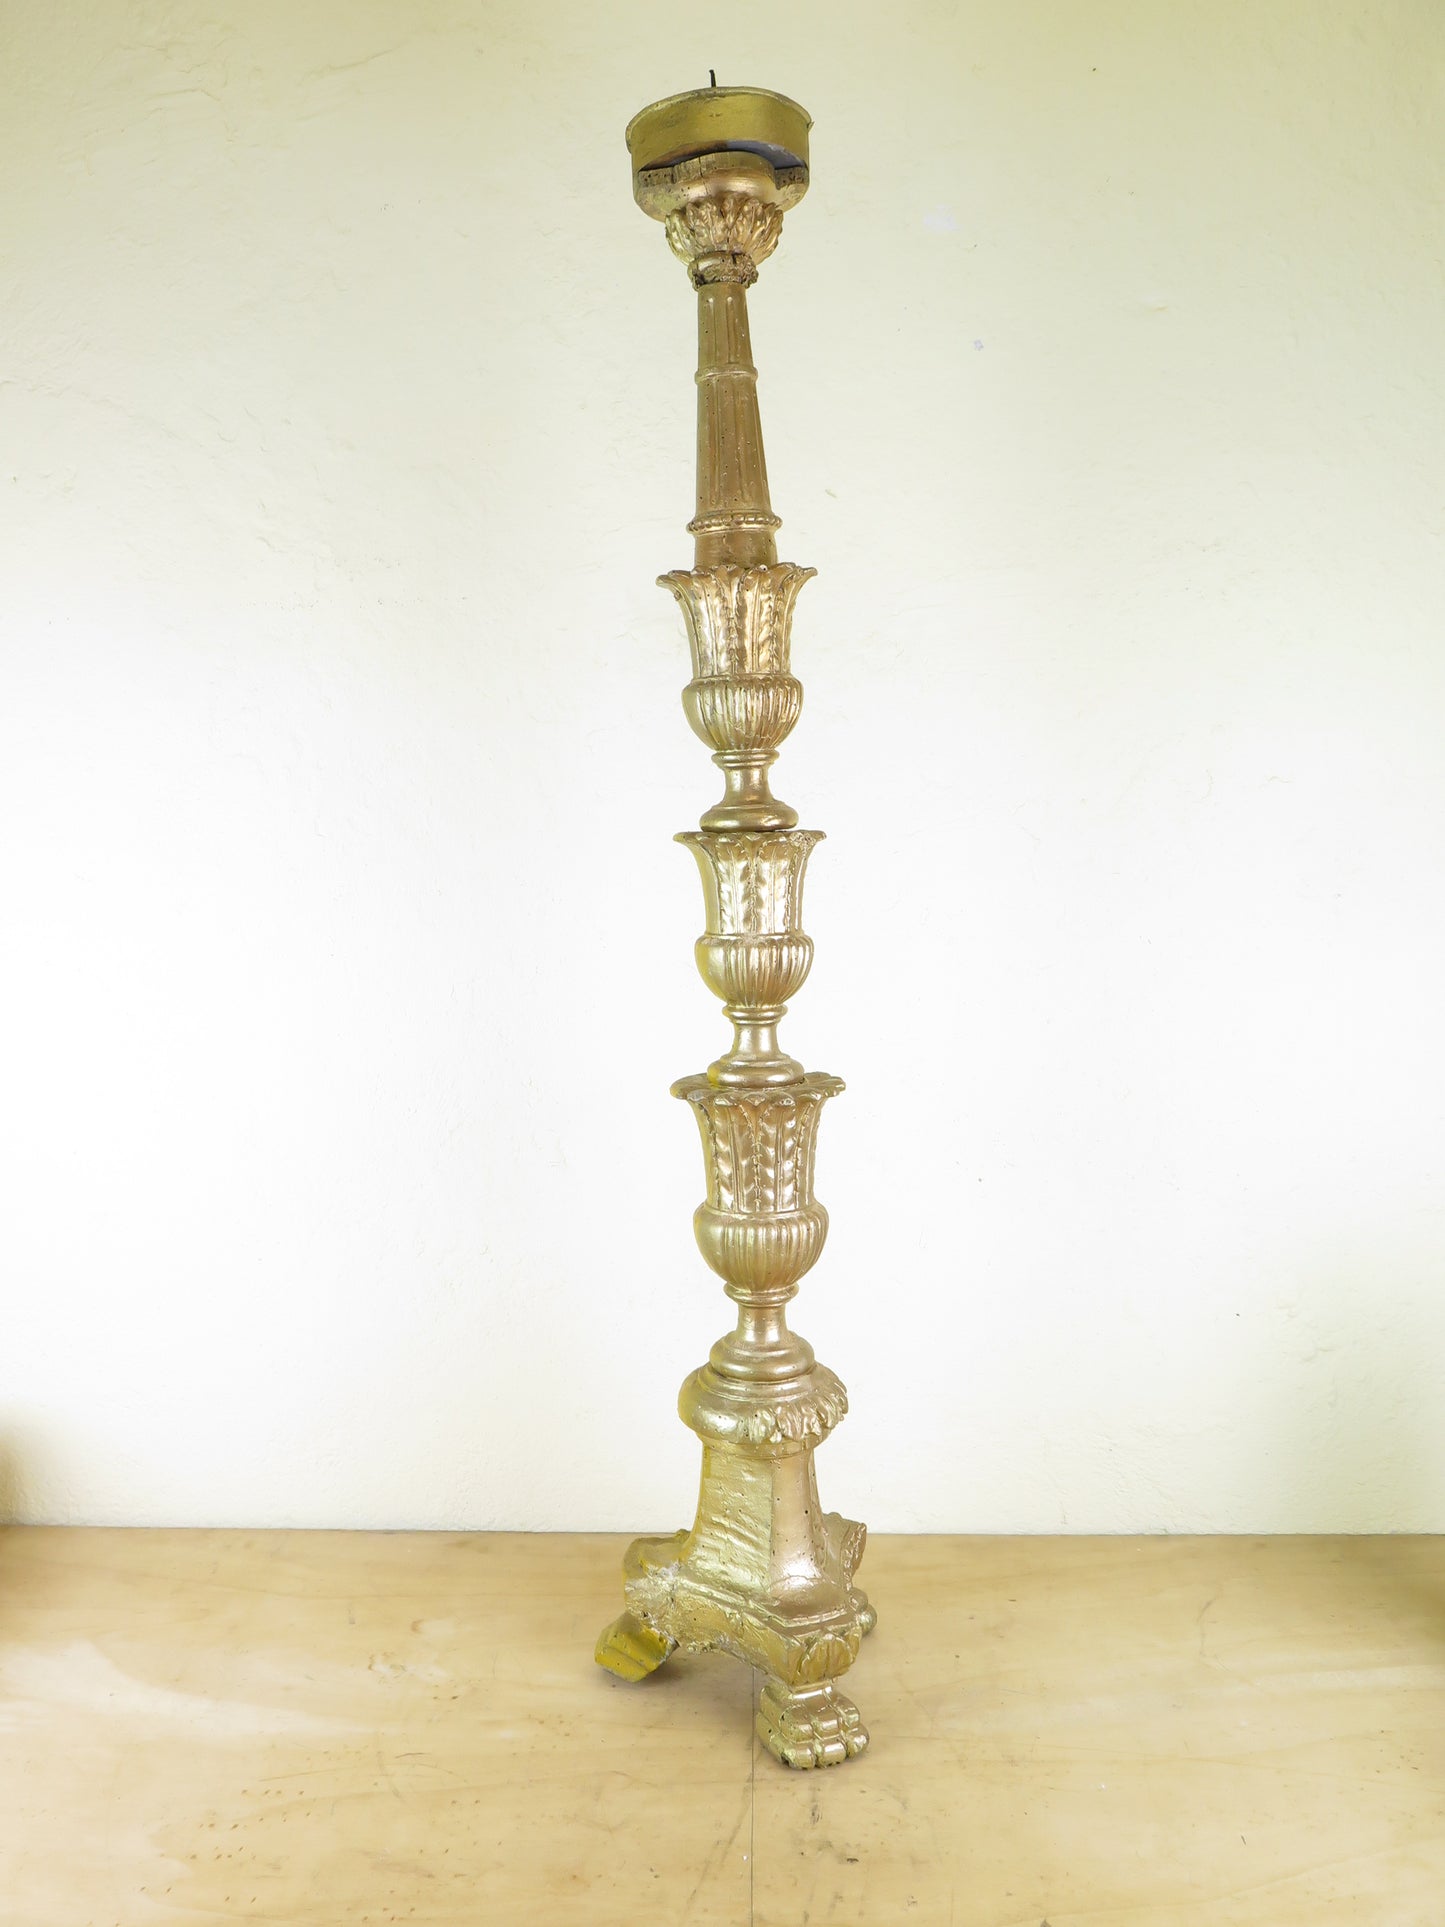 LARGE ANCIENT GOLDEN TORCH CANDLESTICK IN CARVED WOOD BAROQUE Xb